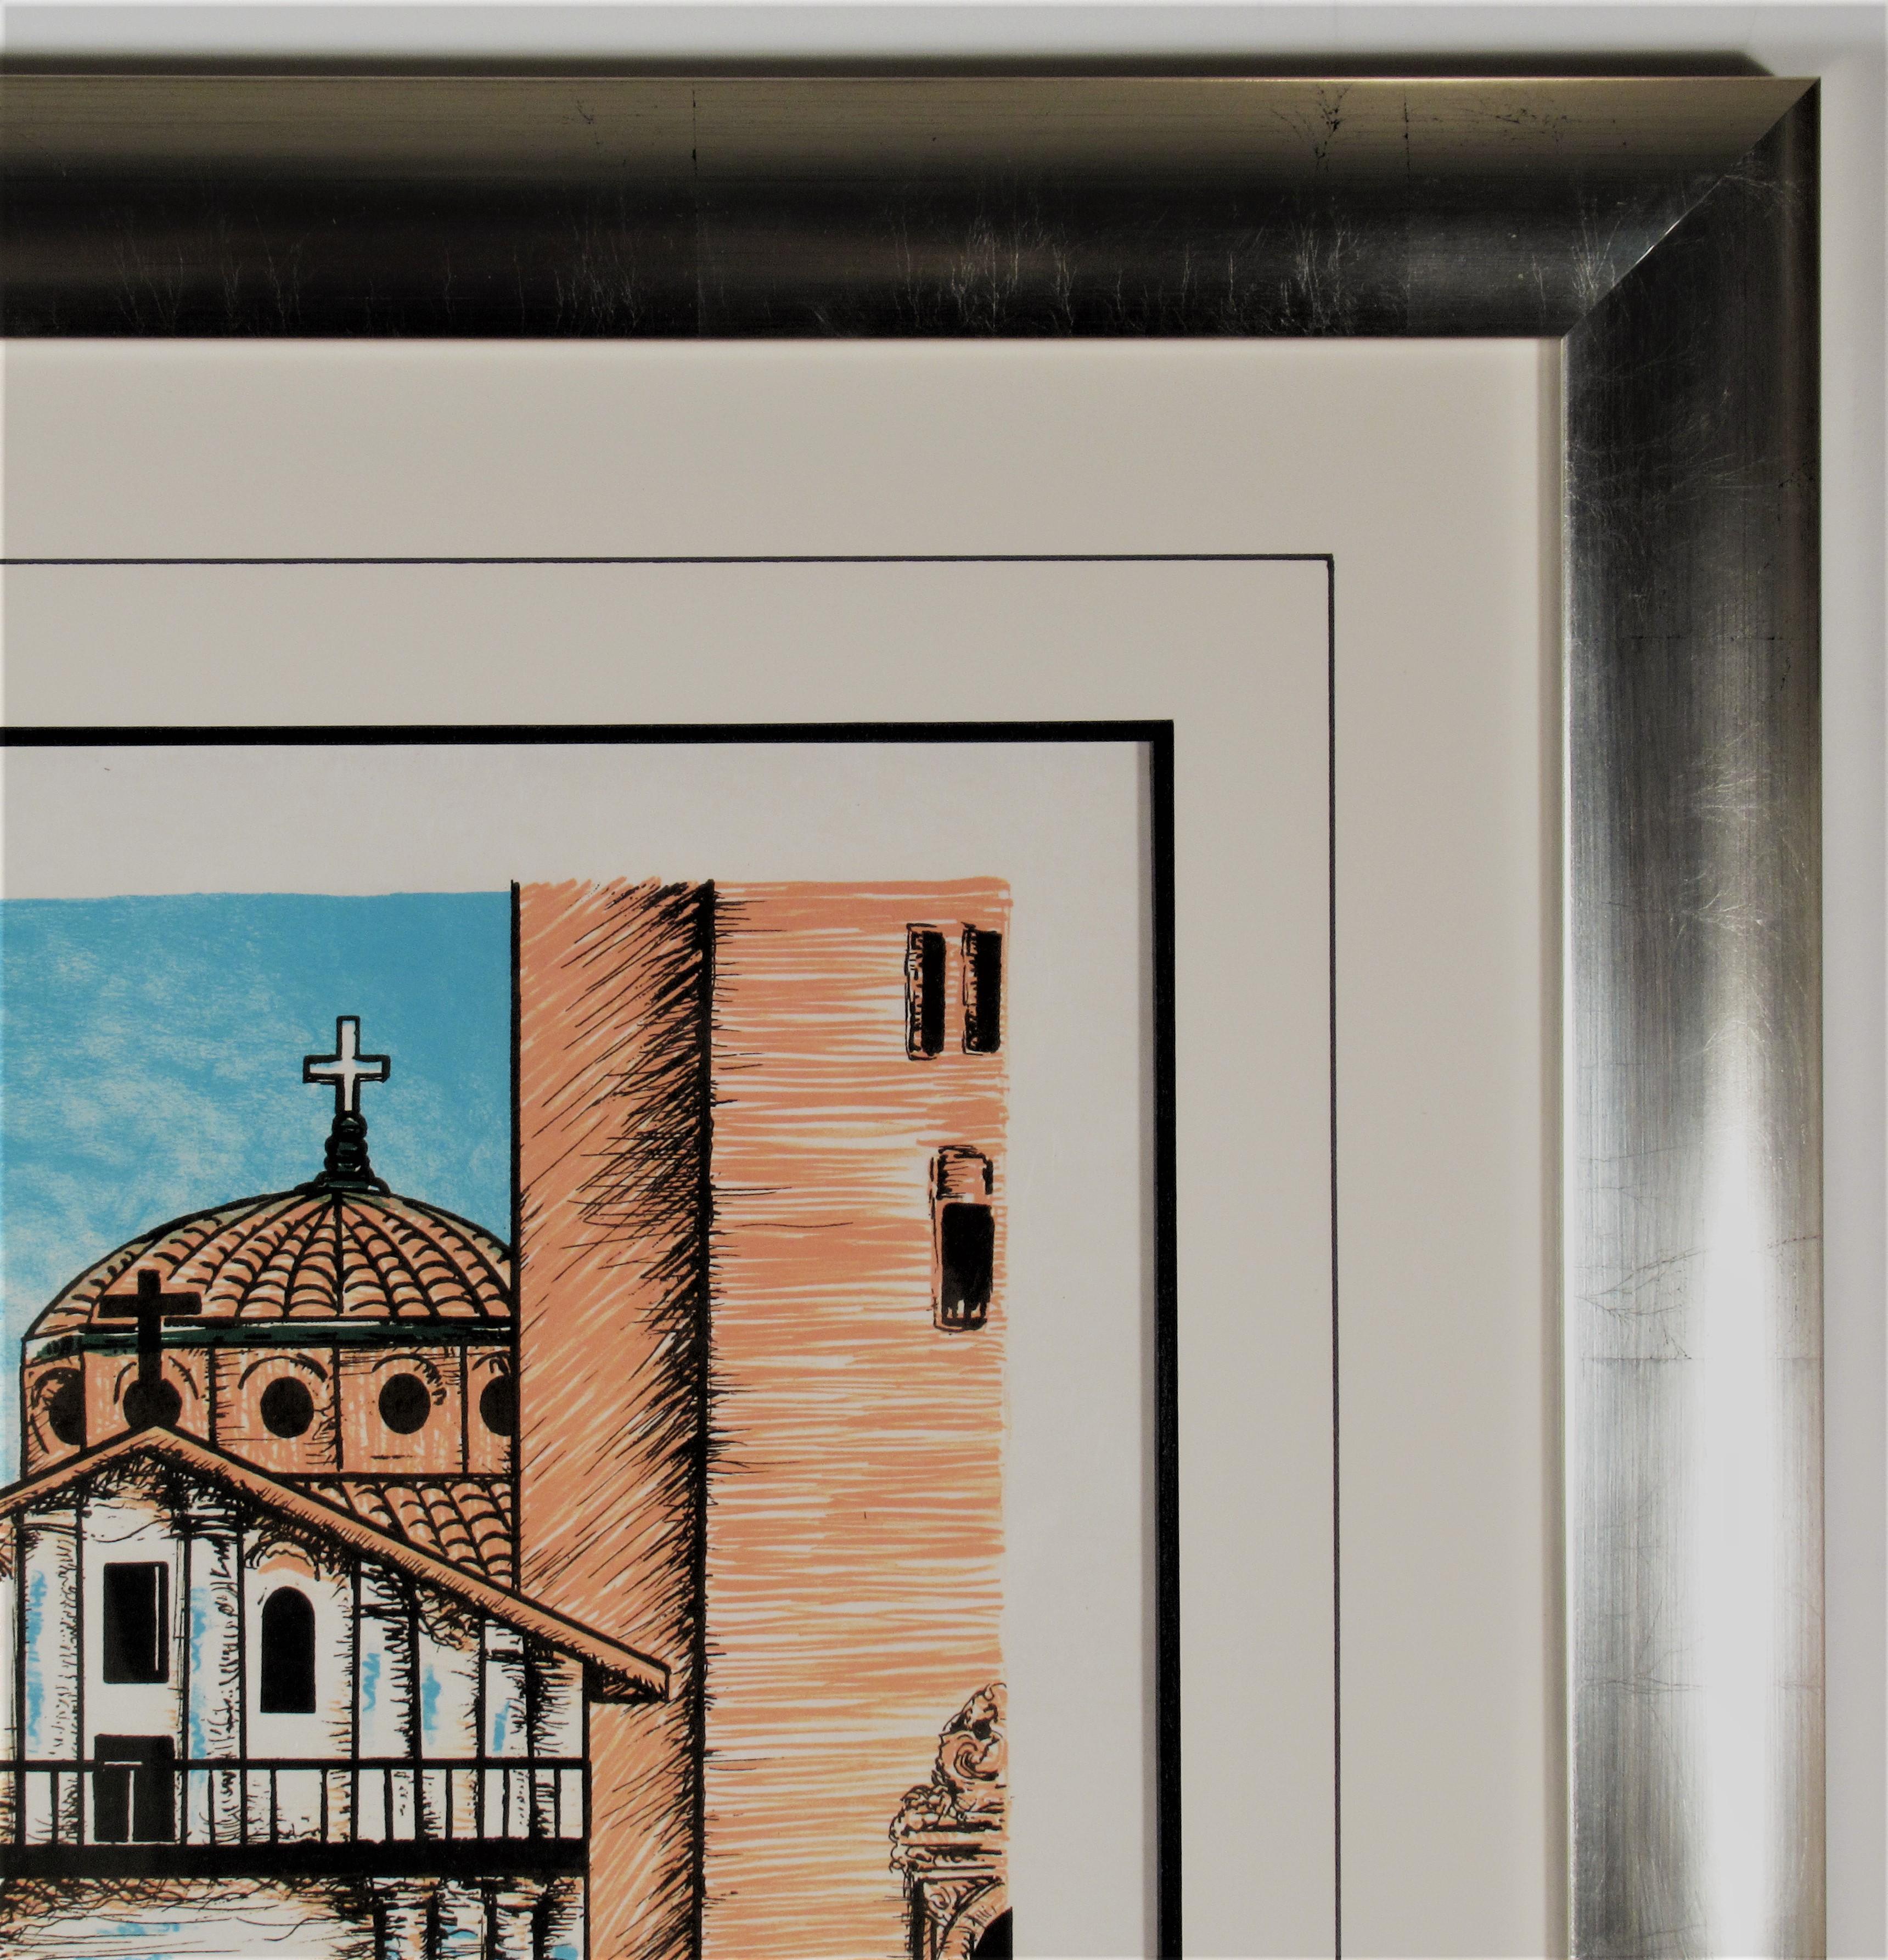 San Francisco, Girl with Mission Dolores - Gray Figurative Print by Margaret Keane